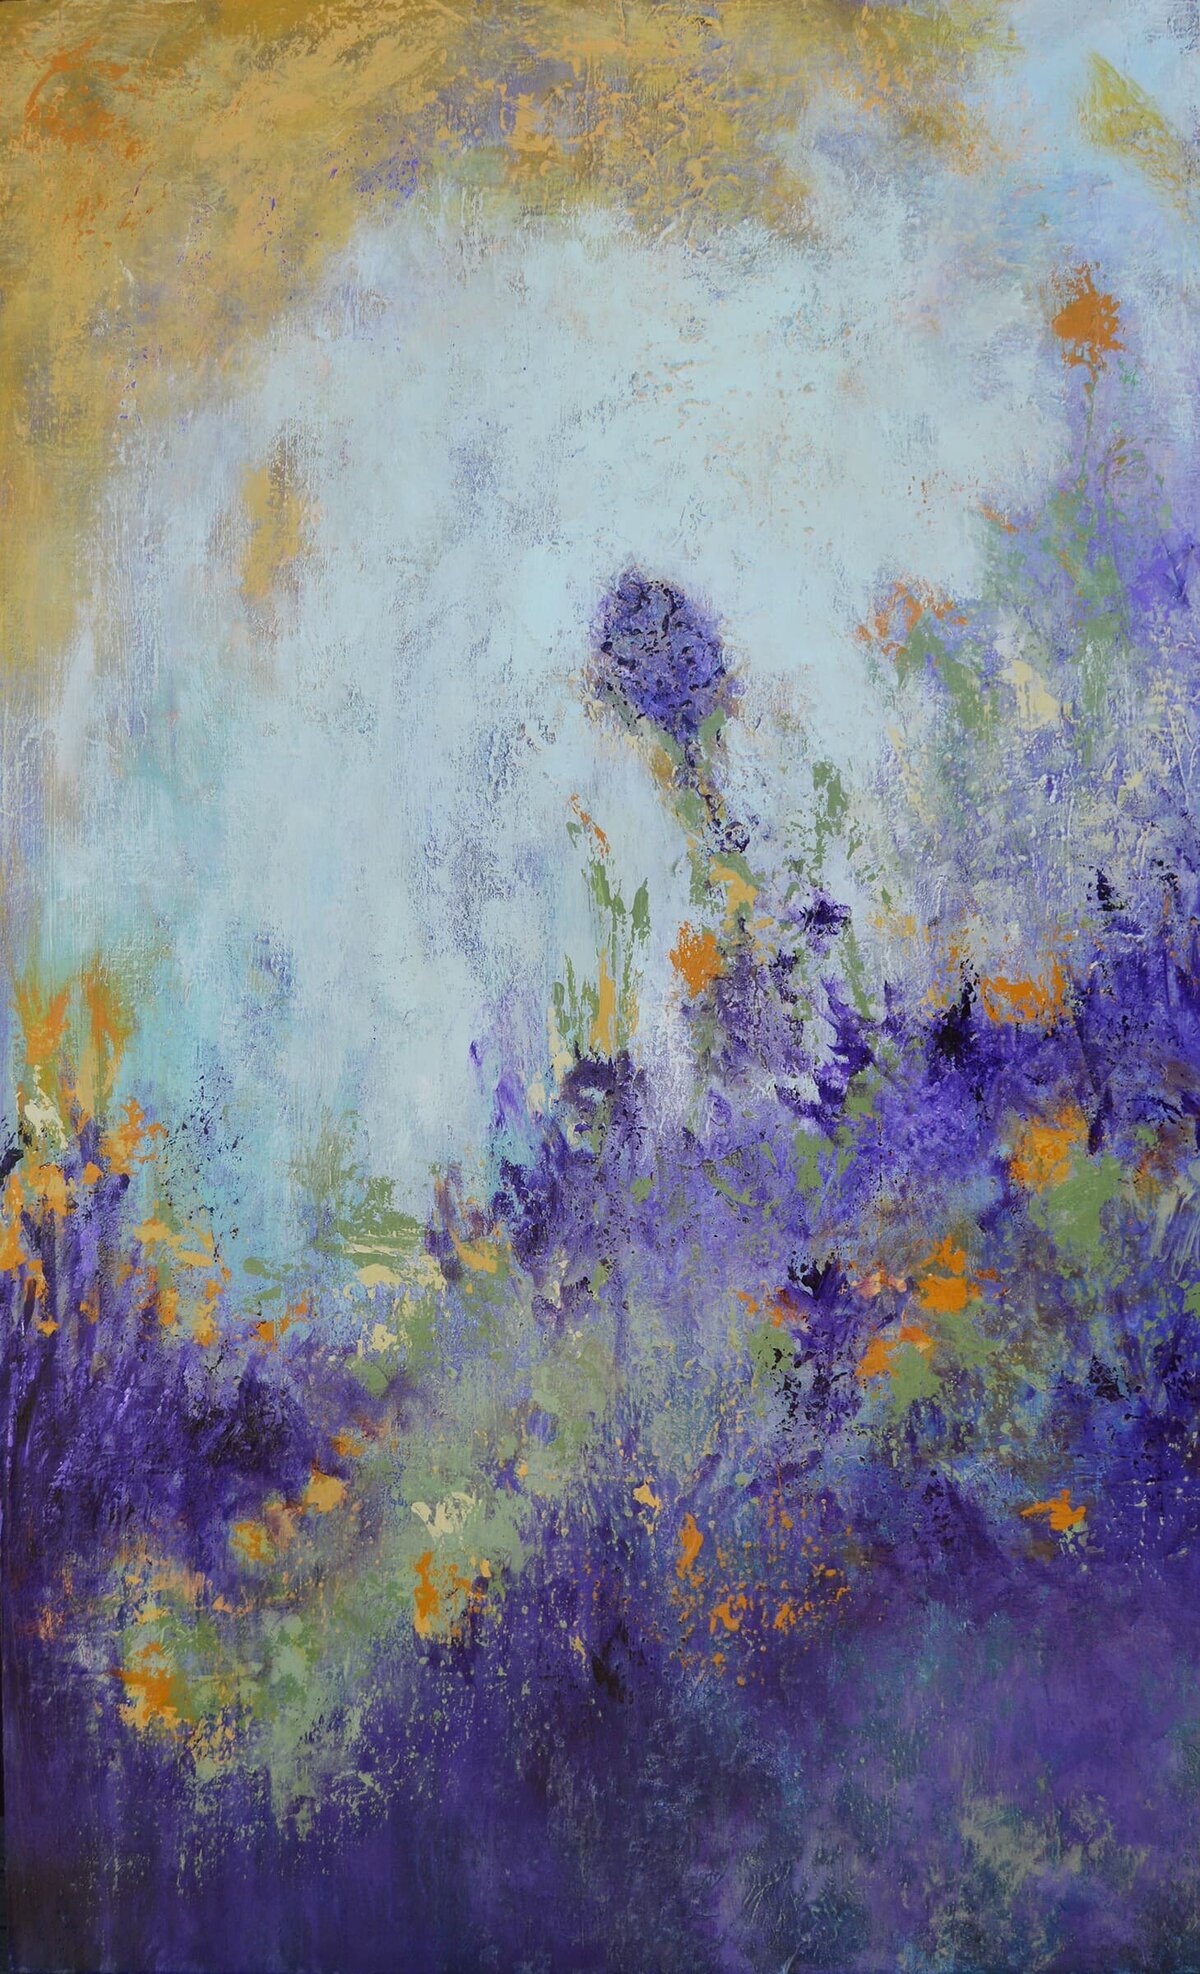 Andrea_Cermanski_Repose_Purple_Yellow_Flowers_Abstract_Acrylic_Painting